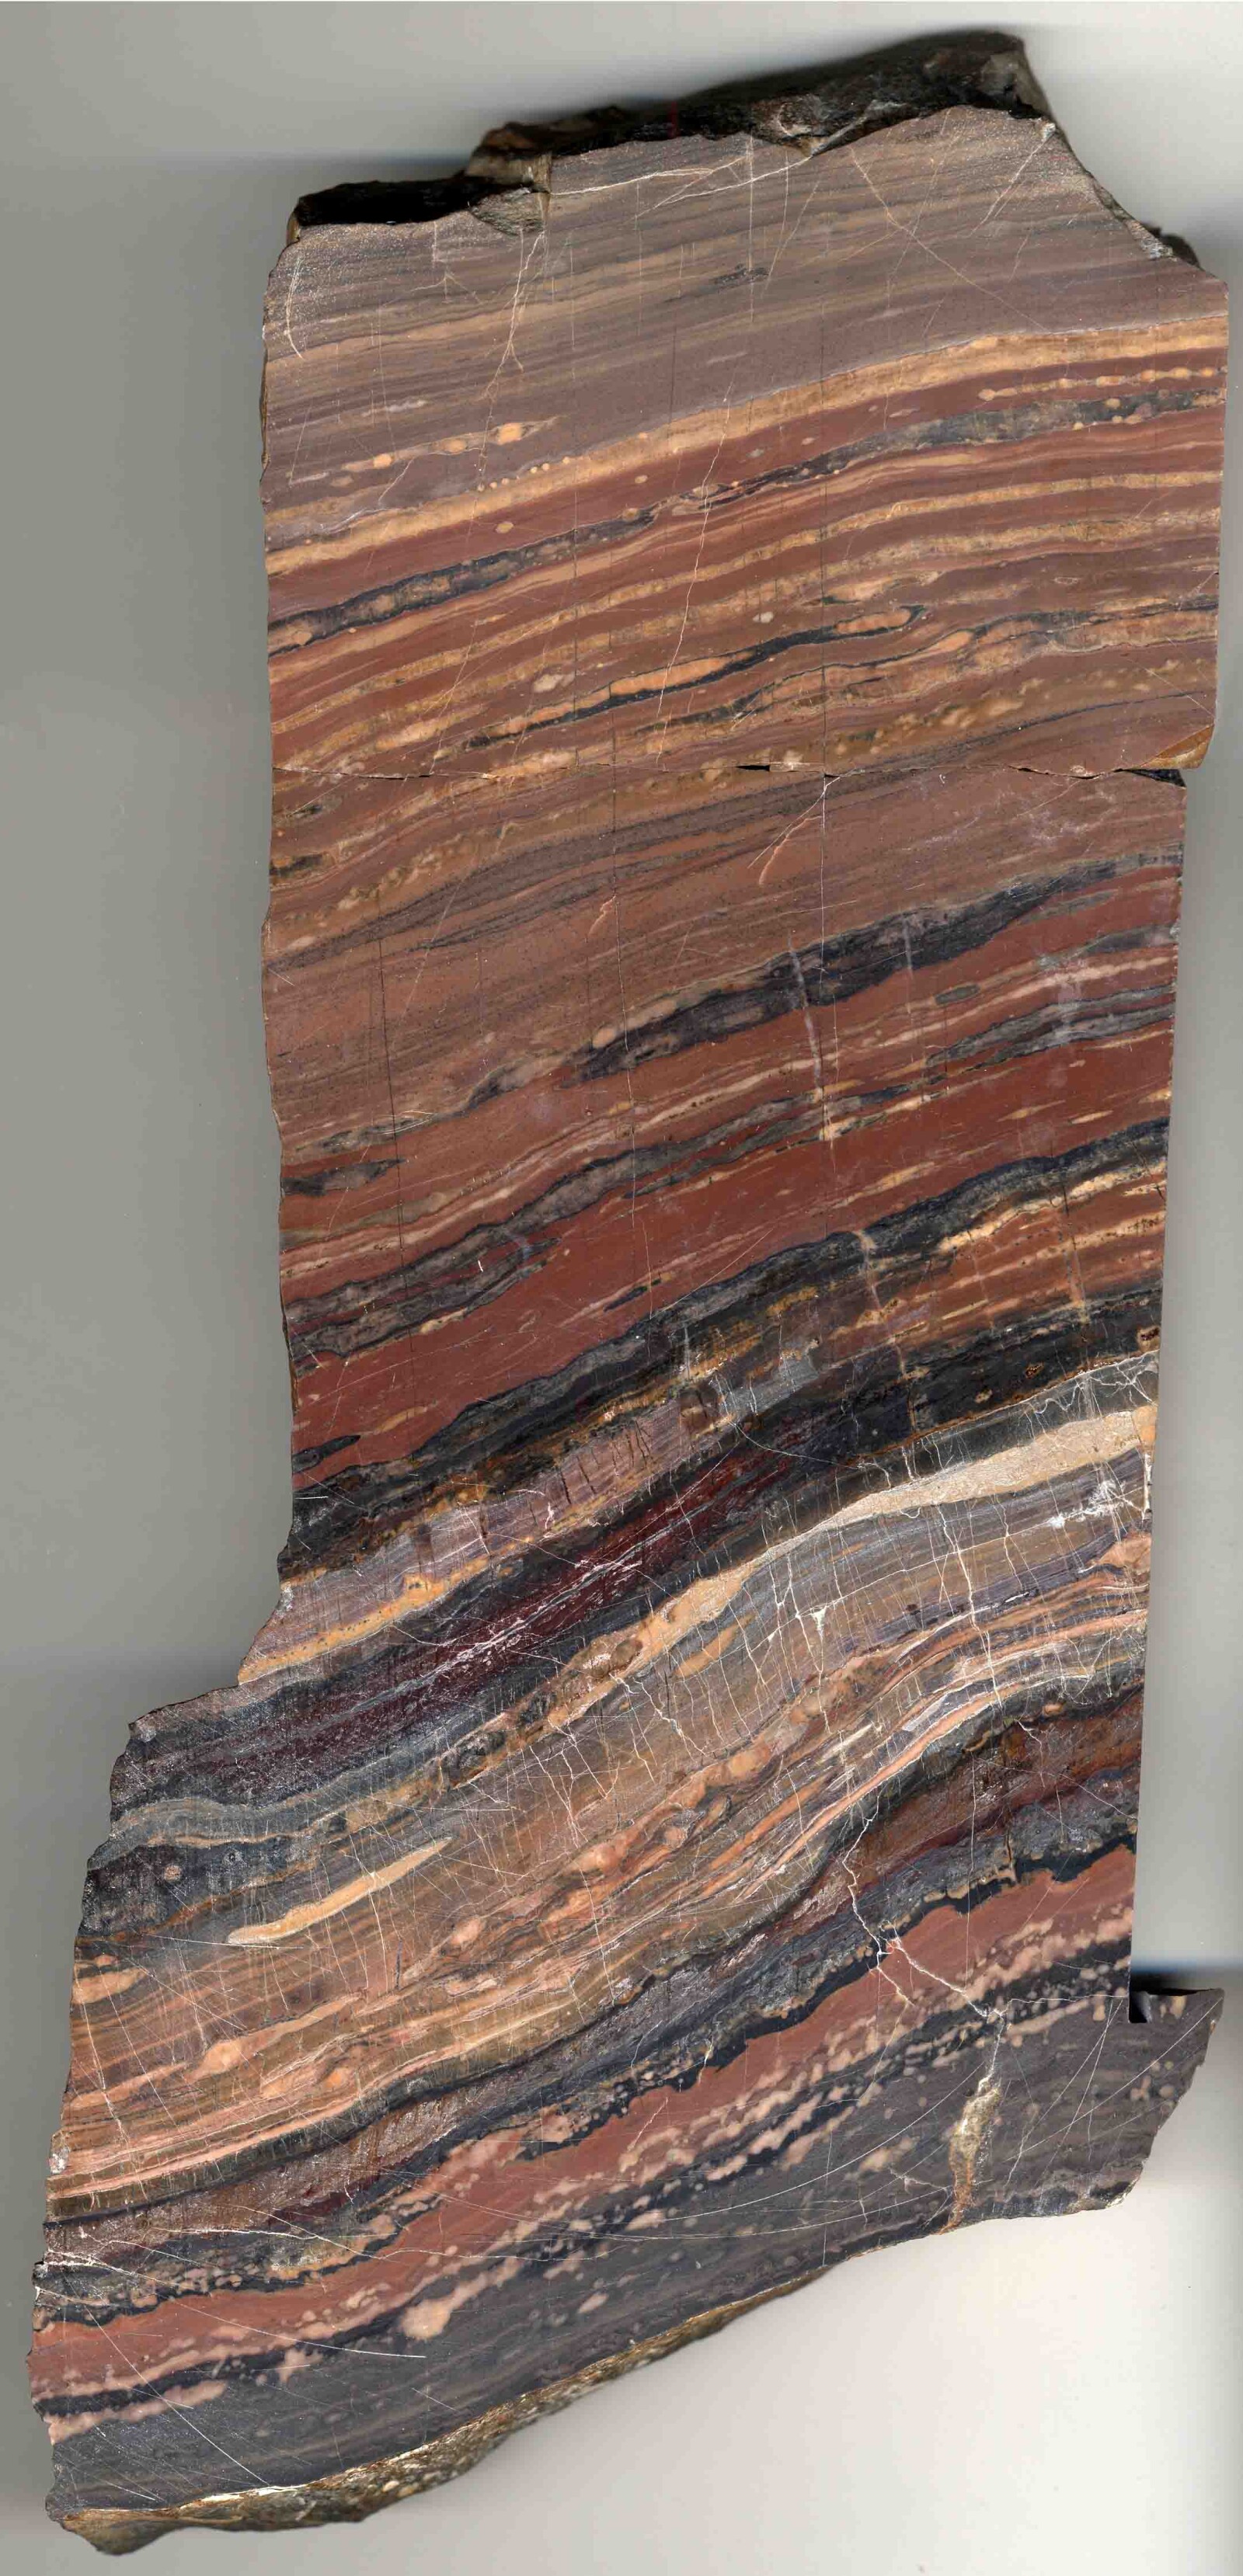 Middle Cambrian age manganese ore-bed: complete 12 inch thick section cut and polished. The different coloured layers represent complex mixtures of silicates, carbonates and oxides of manganese and iron. Specimen number NMW 27.111.GR.66, Moelfre mine, Lla